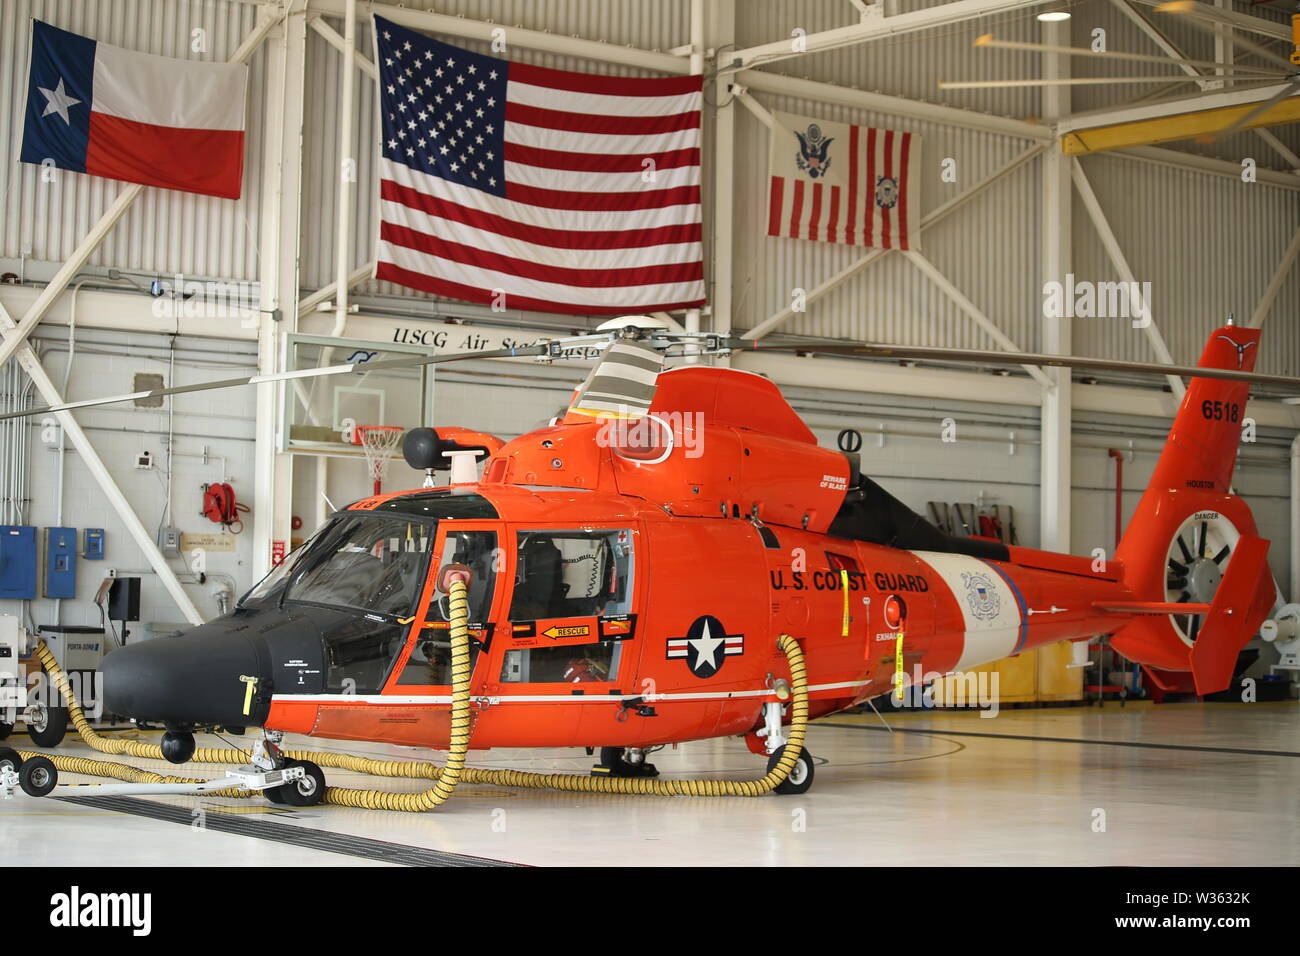 An MH-65 Dolphin helicopter sits at the ready to respond to Tropical Depression Barry at Coast Guard Air Station Houston July 11, 2019. The Coast Guard is pre-staging response assets in the Gulf Coast region due to a forecast of a tropical storm and possible hurricane. (U.S Coast Guard photo by Petty Officer 3rd Class Paige Hause) Stock Photo